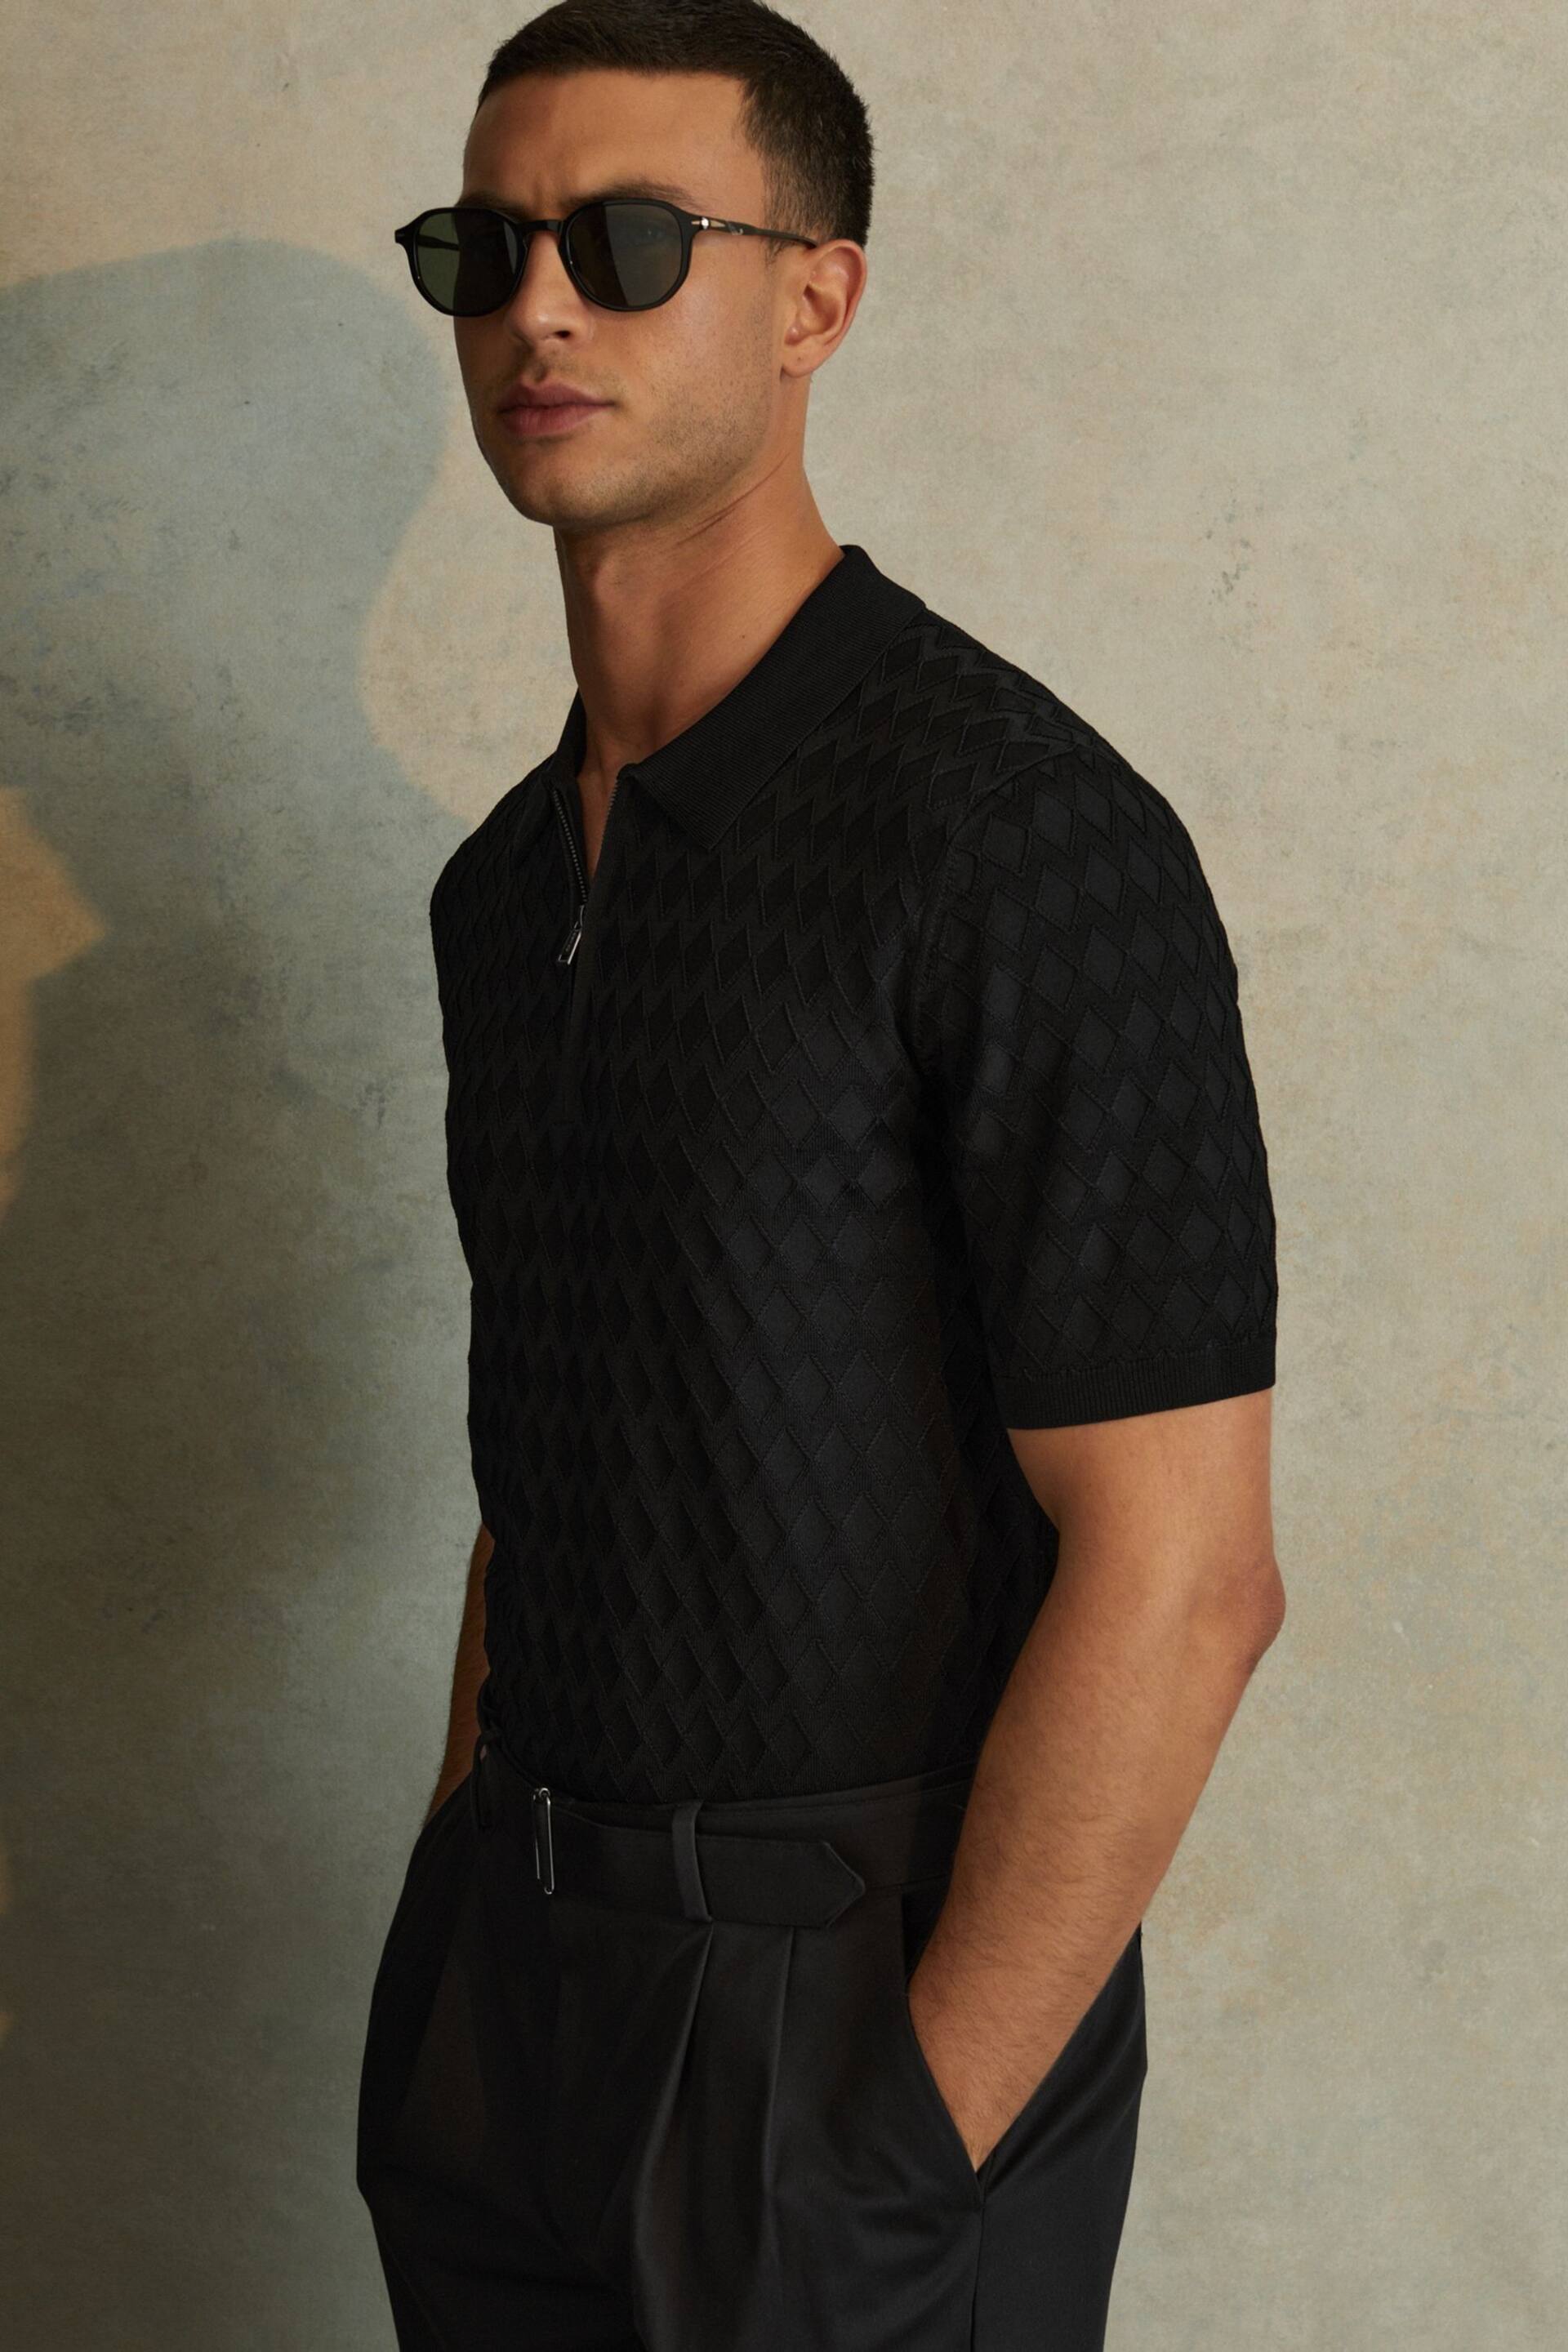 Reiss Black Rizzo Half-Zip Knitted Polo Shirt - Image 1 of 5